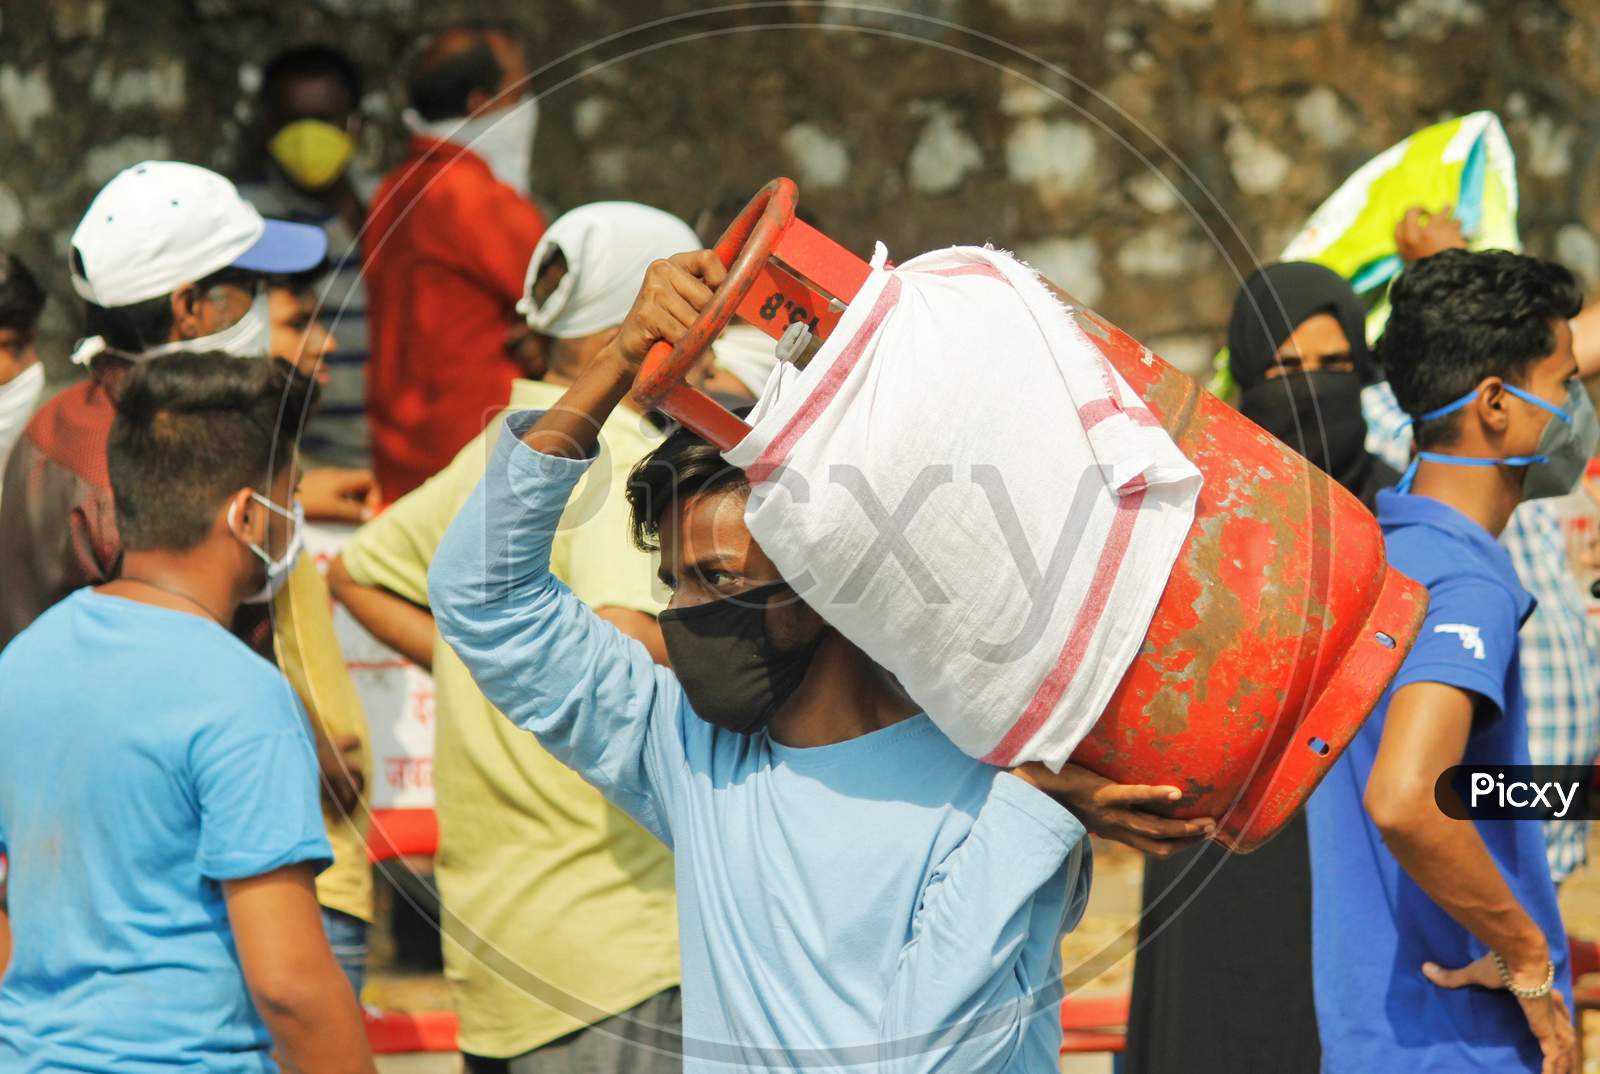 A man carries a gas cylinder as people wait to purchase cooking gas after India ordered a 21- day nationwide lockdown to limit the spreading of coronavirus disease (COVID-19) in Mumbai, India March 27, 2020.